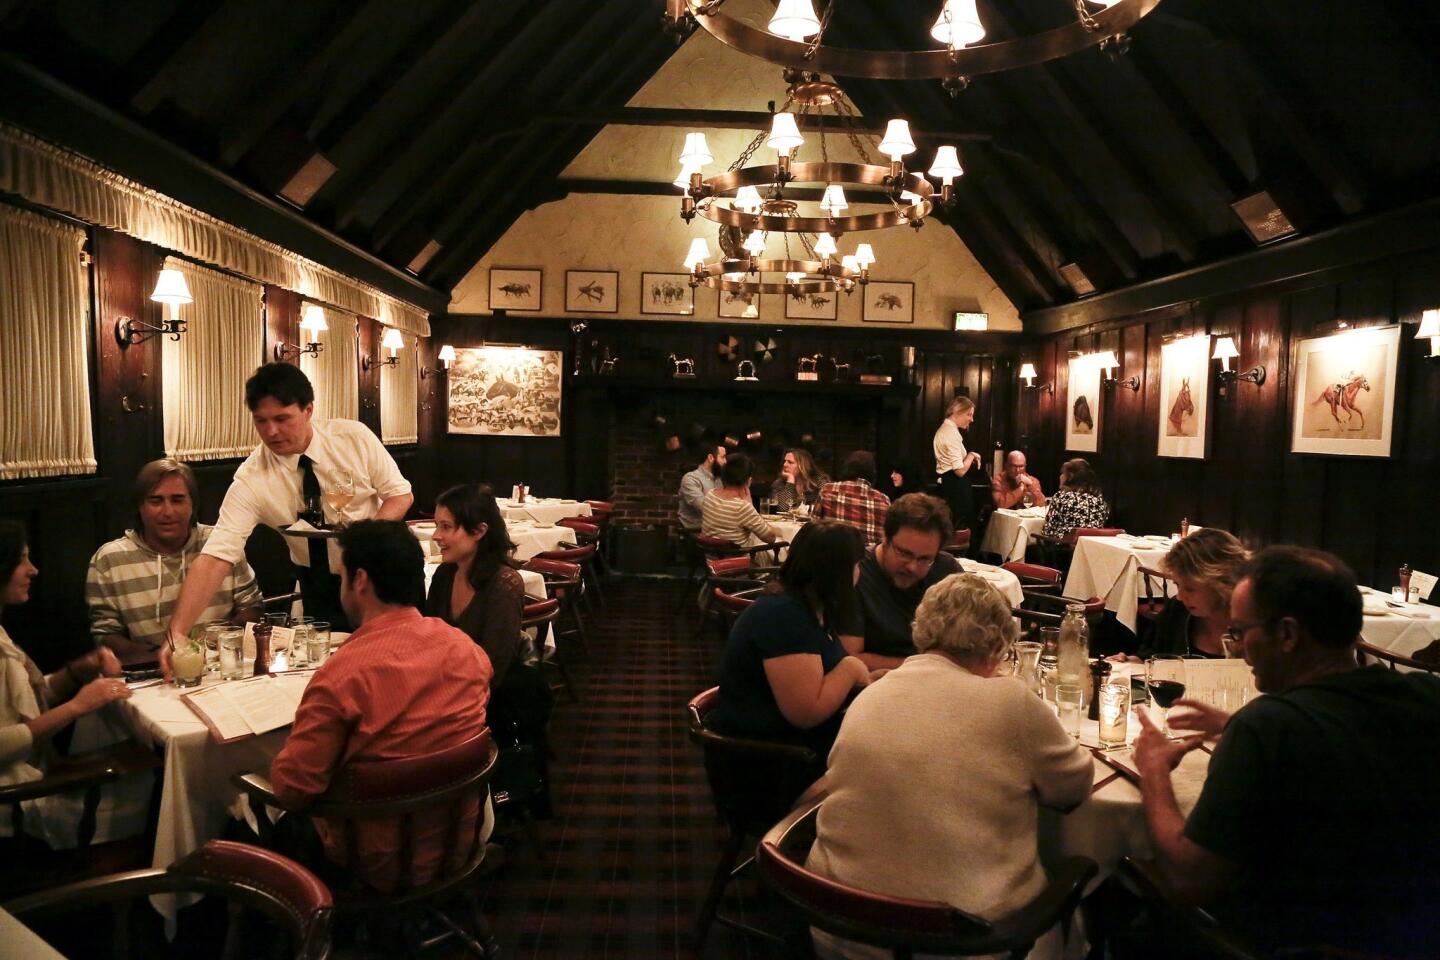 The main dining room at Tom Bergin's Tavern looks like the kind of place you'd see Raymond Chandler.